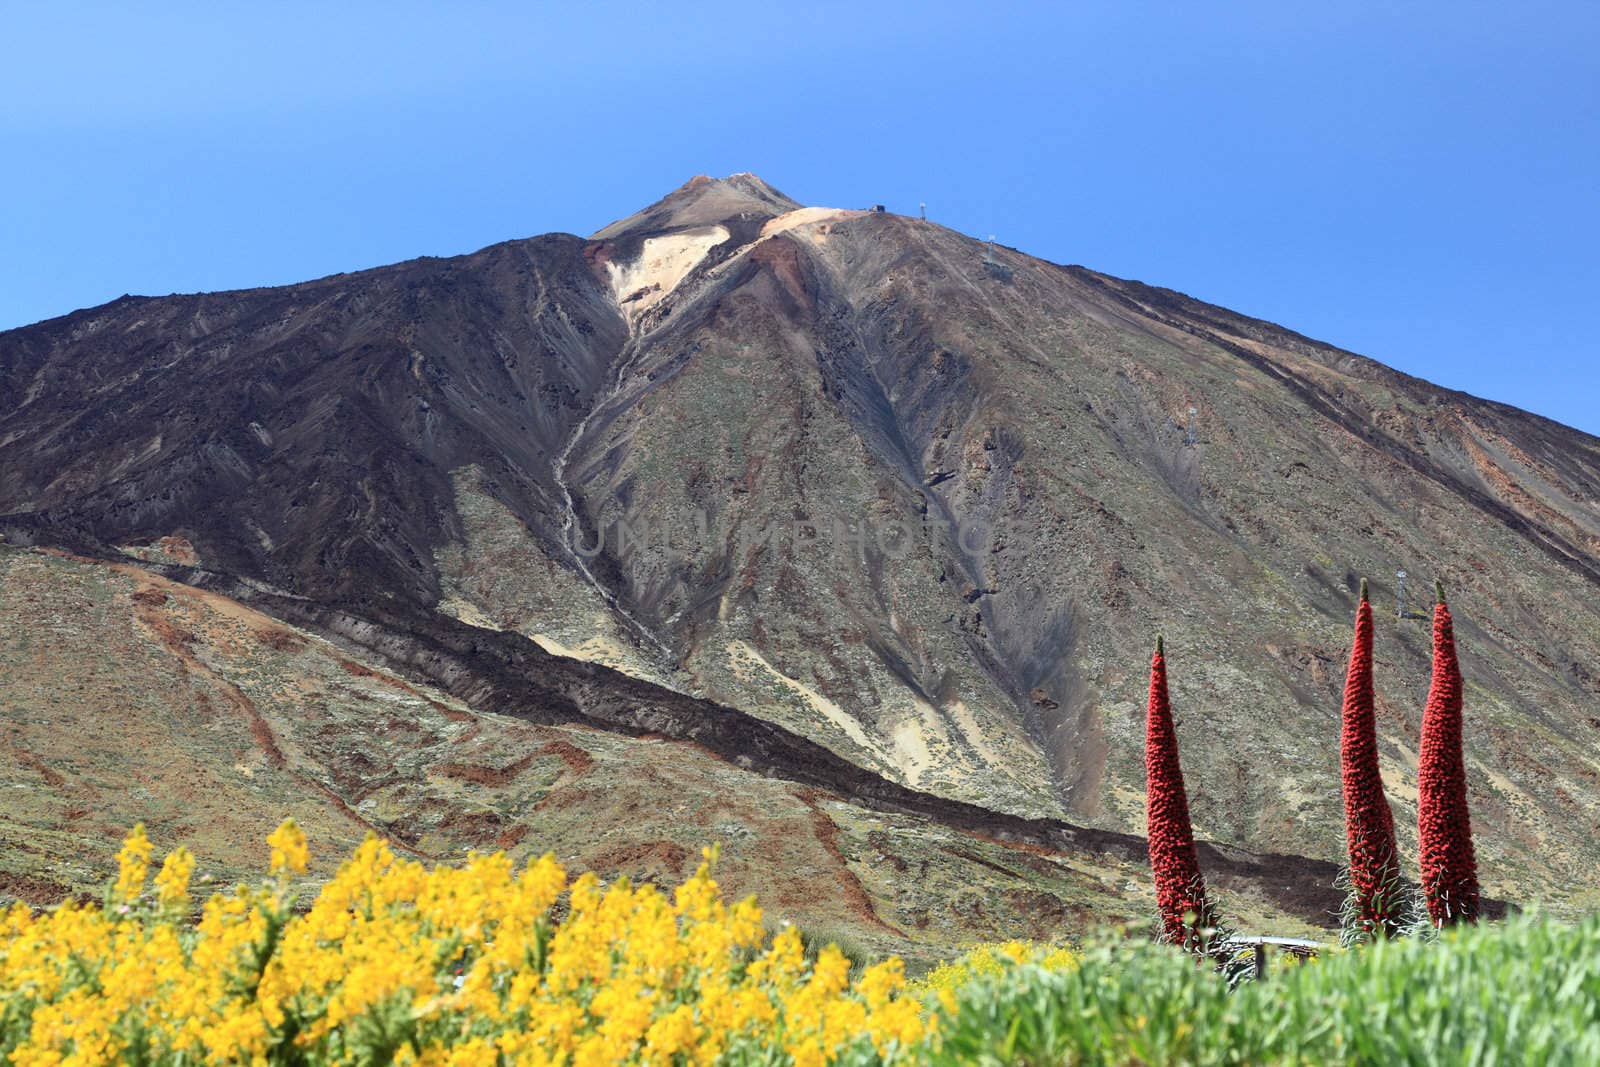 Tenerife Mountain, Volcano Mount Teide showing Pico del Teide and flowers landscape. Canary Islands, Spain.